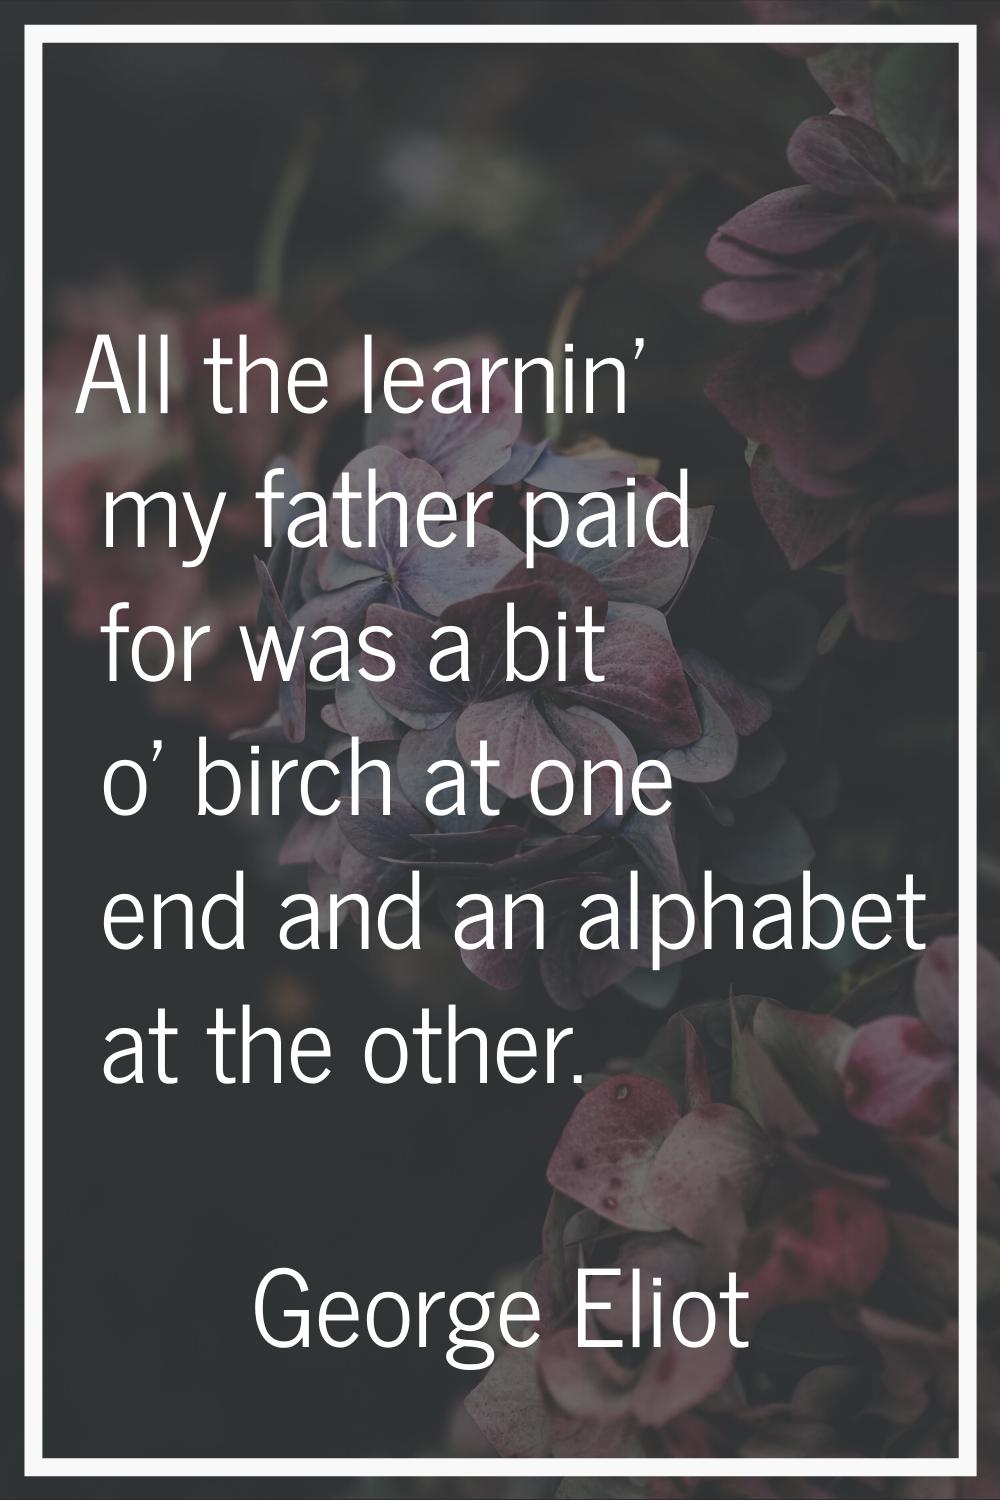 All the learnin' my father paid for was a bit o' birch at one end and an alphabet at the other.